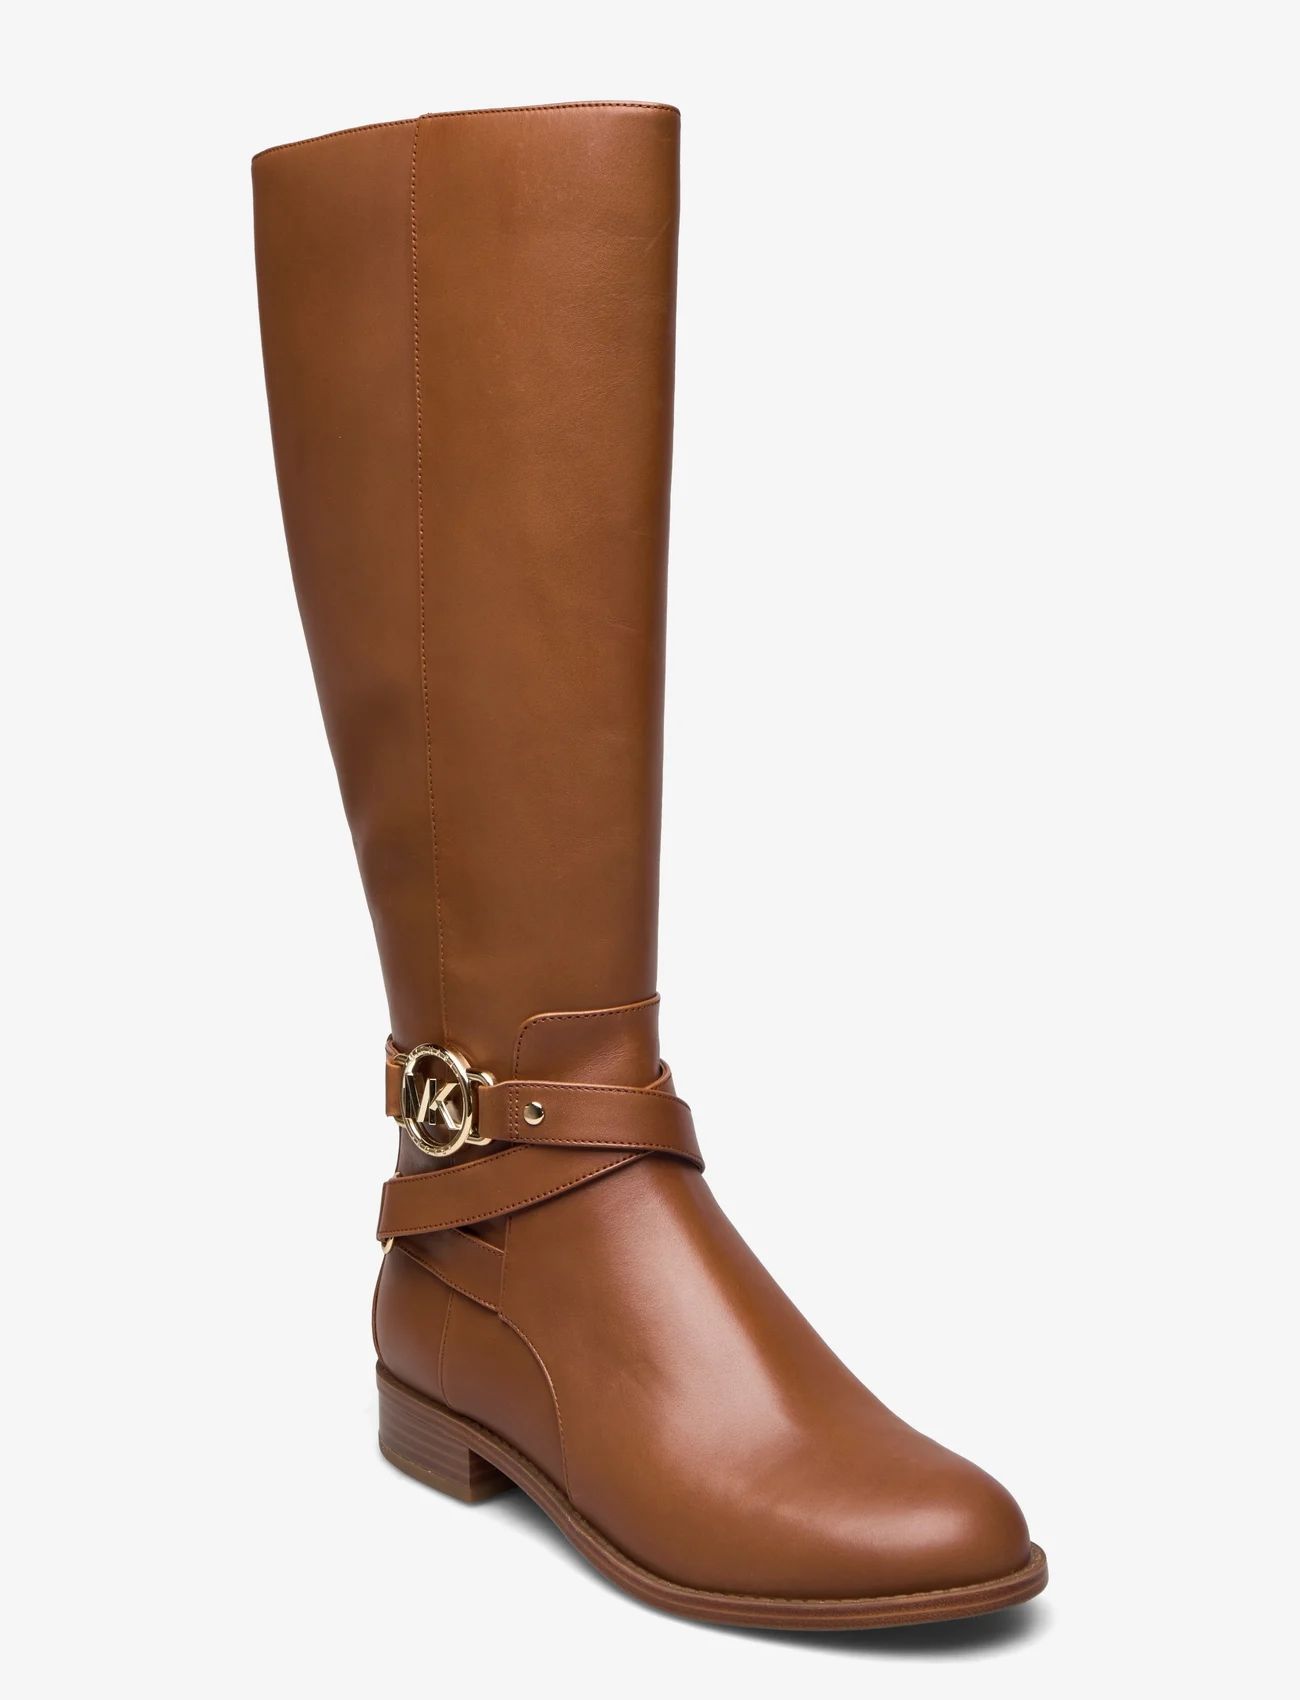 Michael Kors - RORY BOOT - kniehohe stiefel - luggage - 0